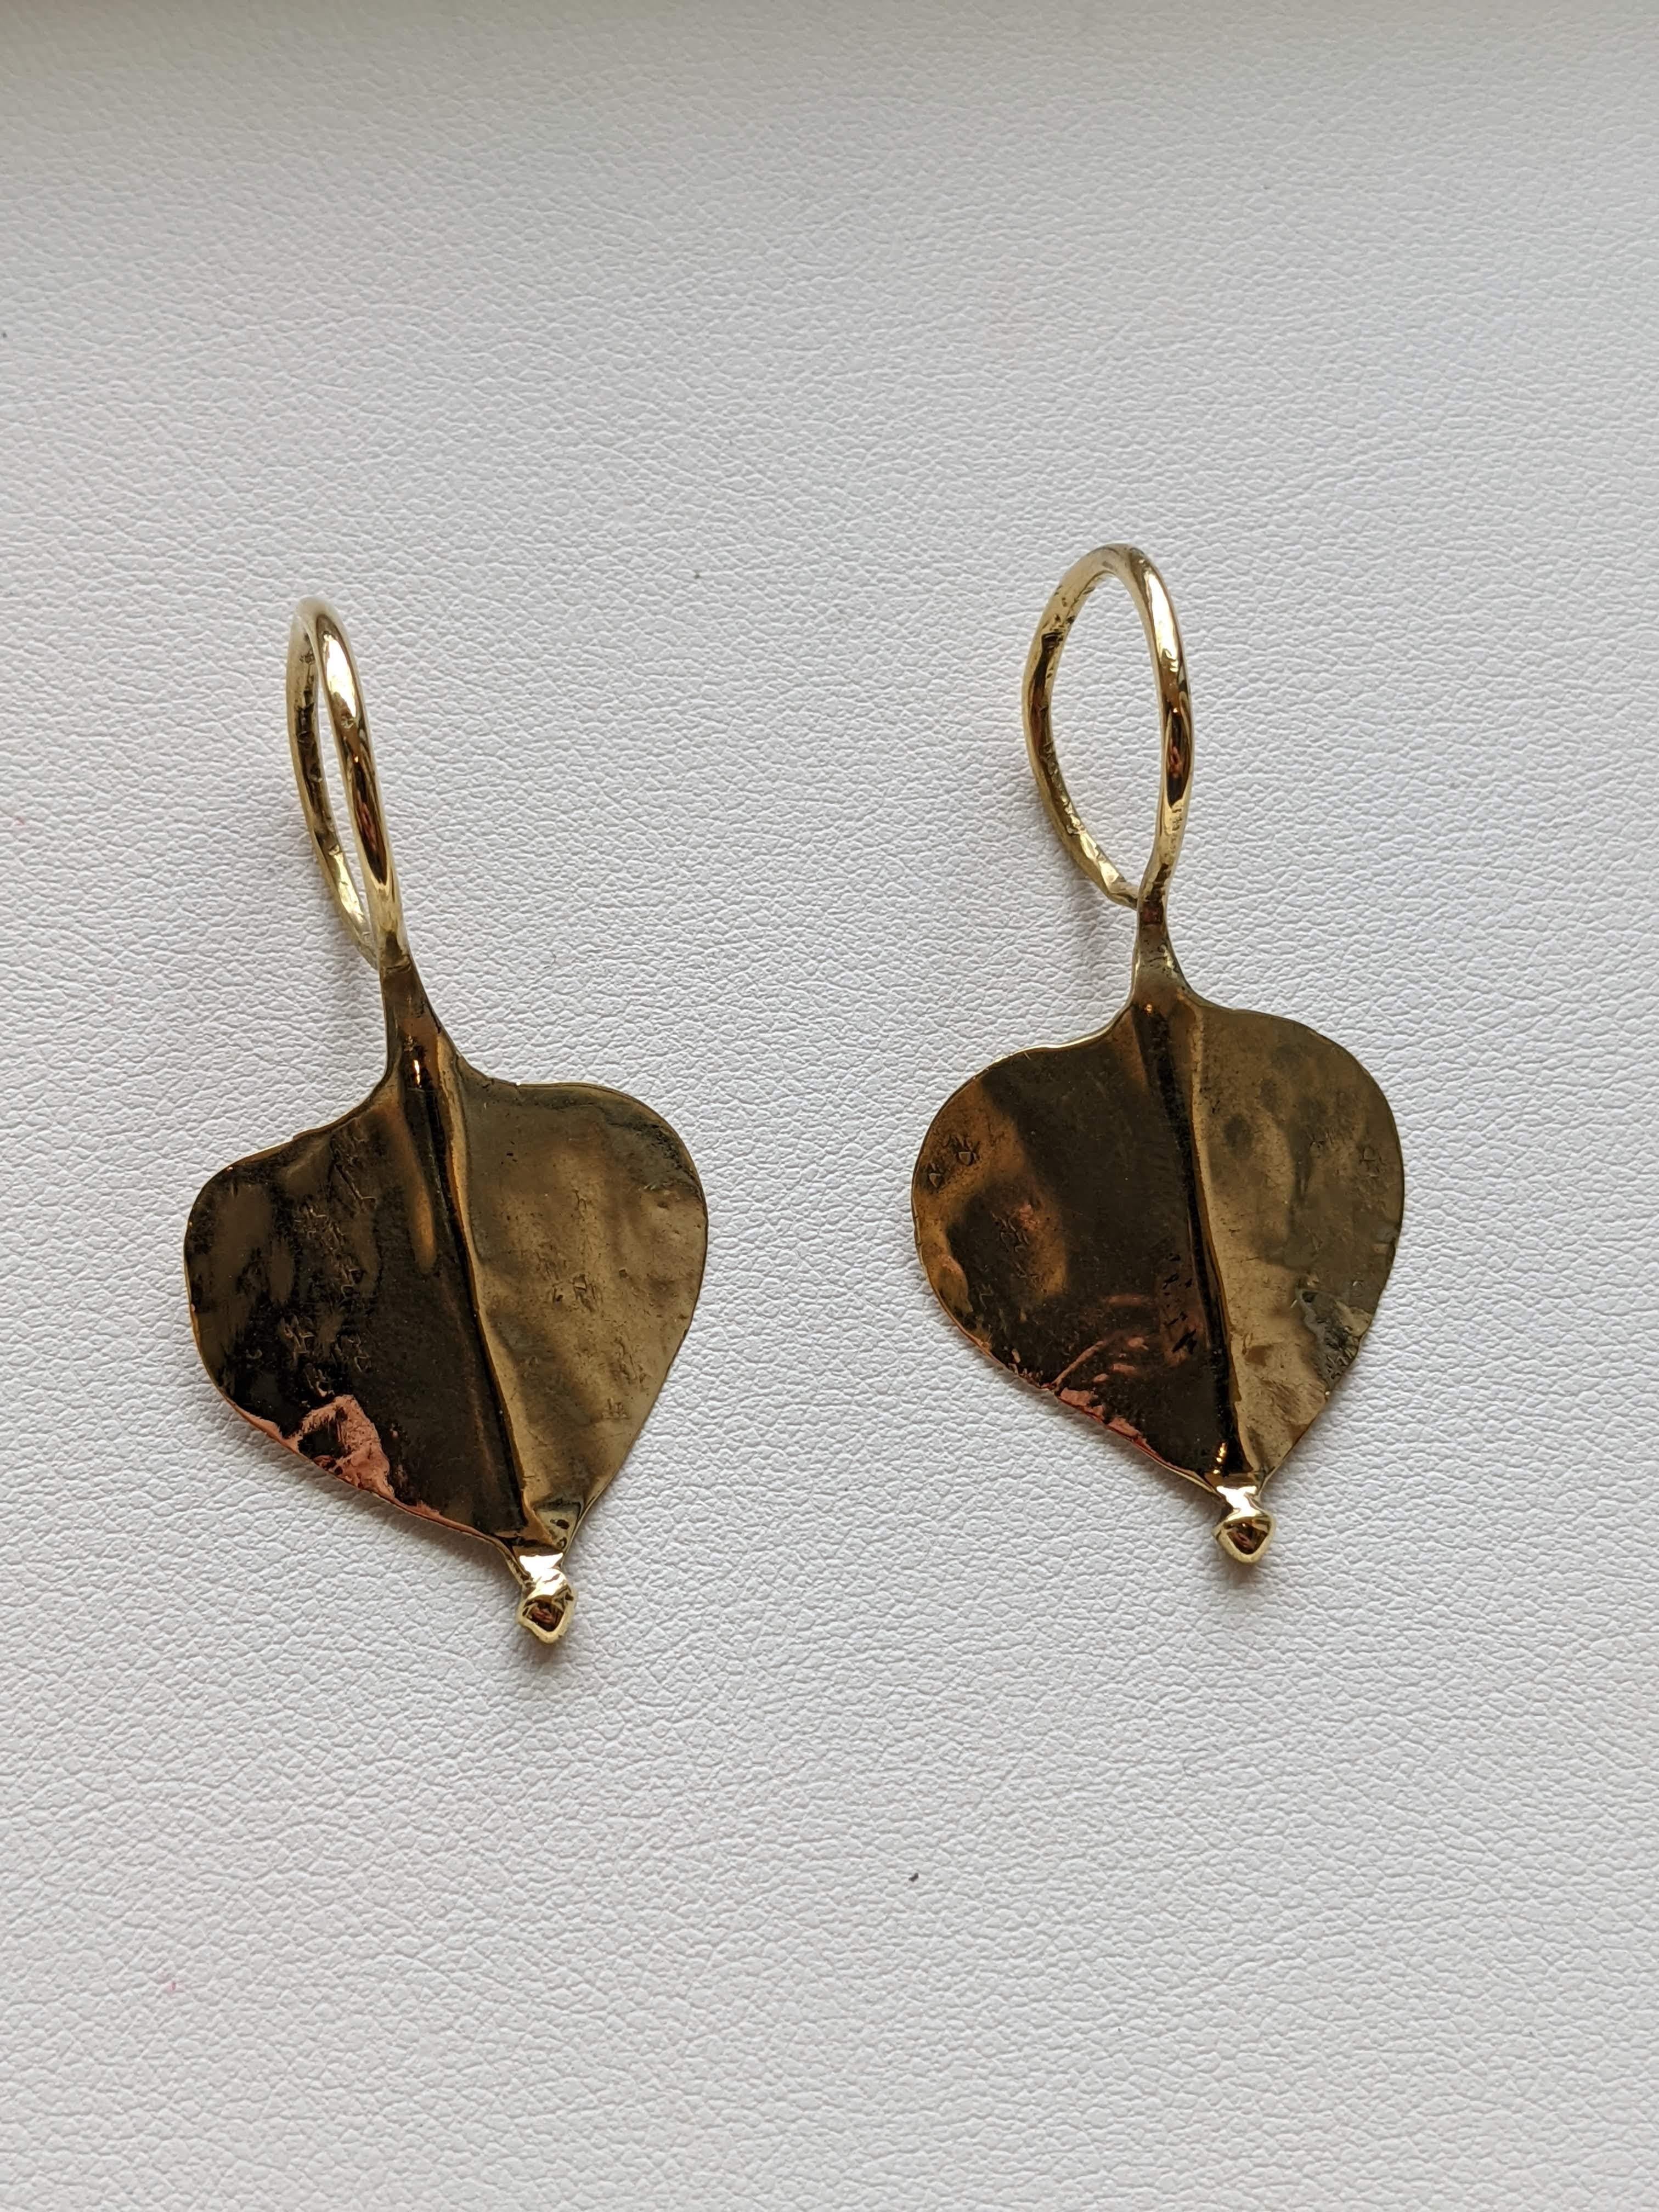 These pretty leaf shaped earrings are made entirely from 22k yellow gold, hence their beautiful rich yellow colour. These authentic antique earrings from India are a lovely shape and have a handcrafted look to them. They have rounded hooks that are